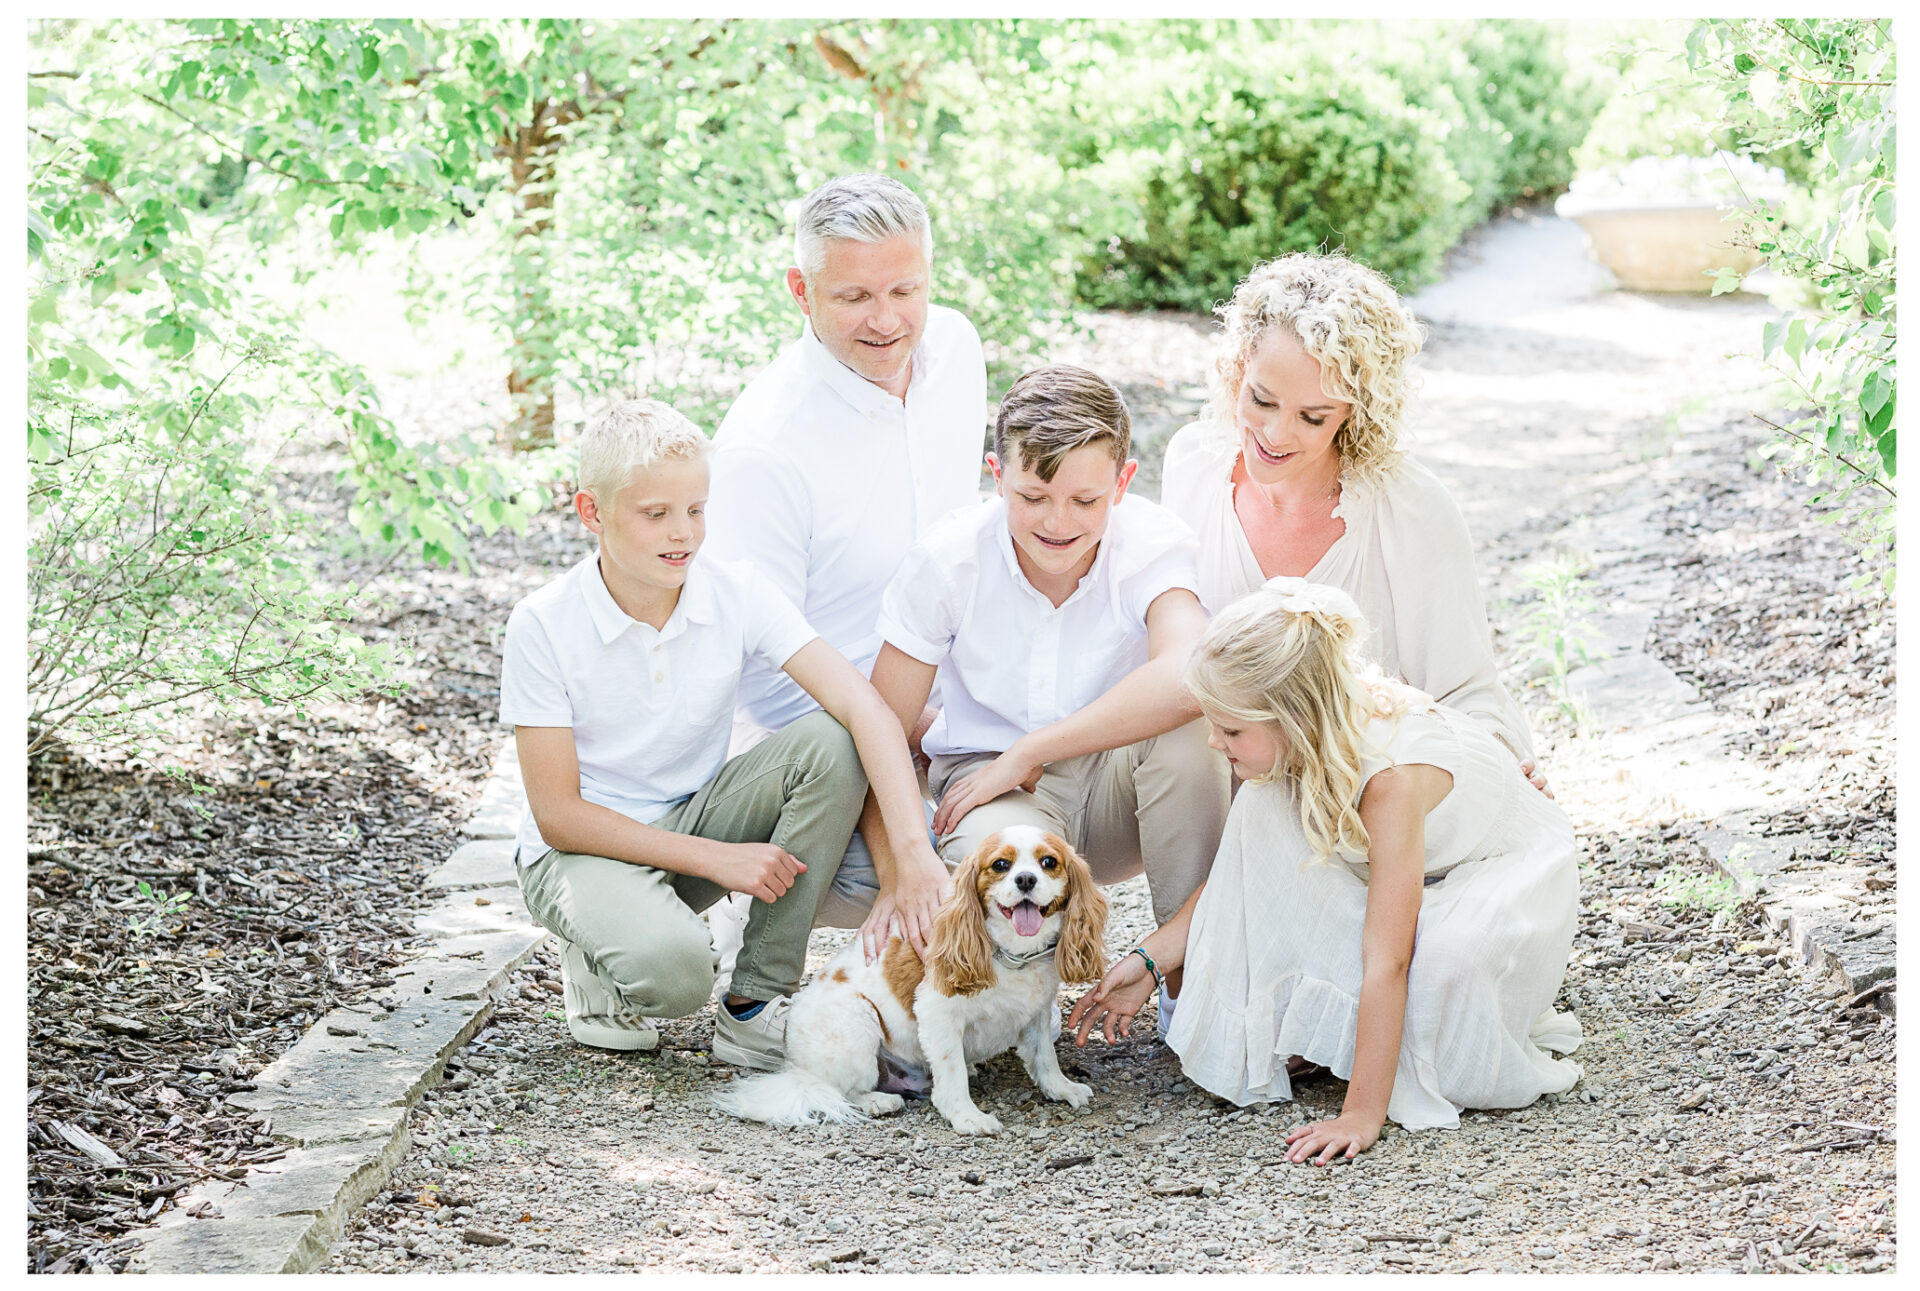 Cincinnati Columbus Dayton OH Family Photographer | Winter Freire Photography | Light and Airy Family Session Dayton, Ohio Photographers | Organic Ohio Family Session with Dog